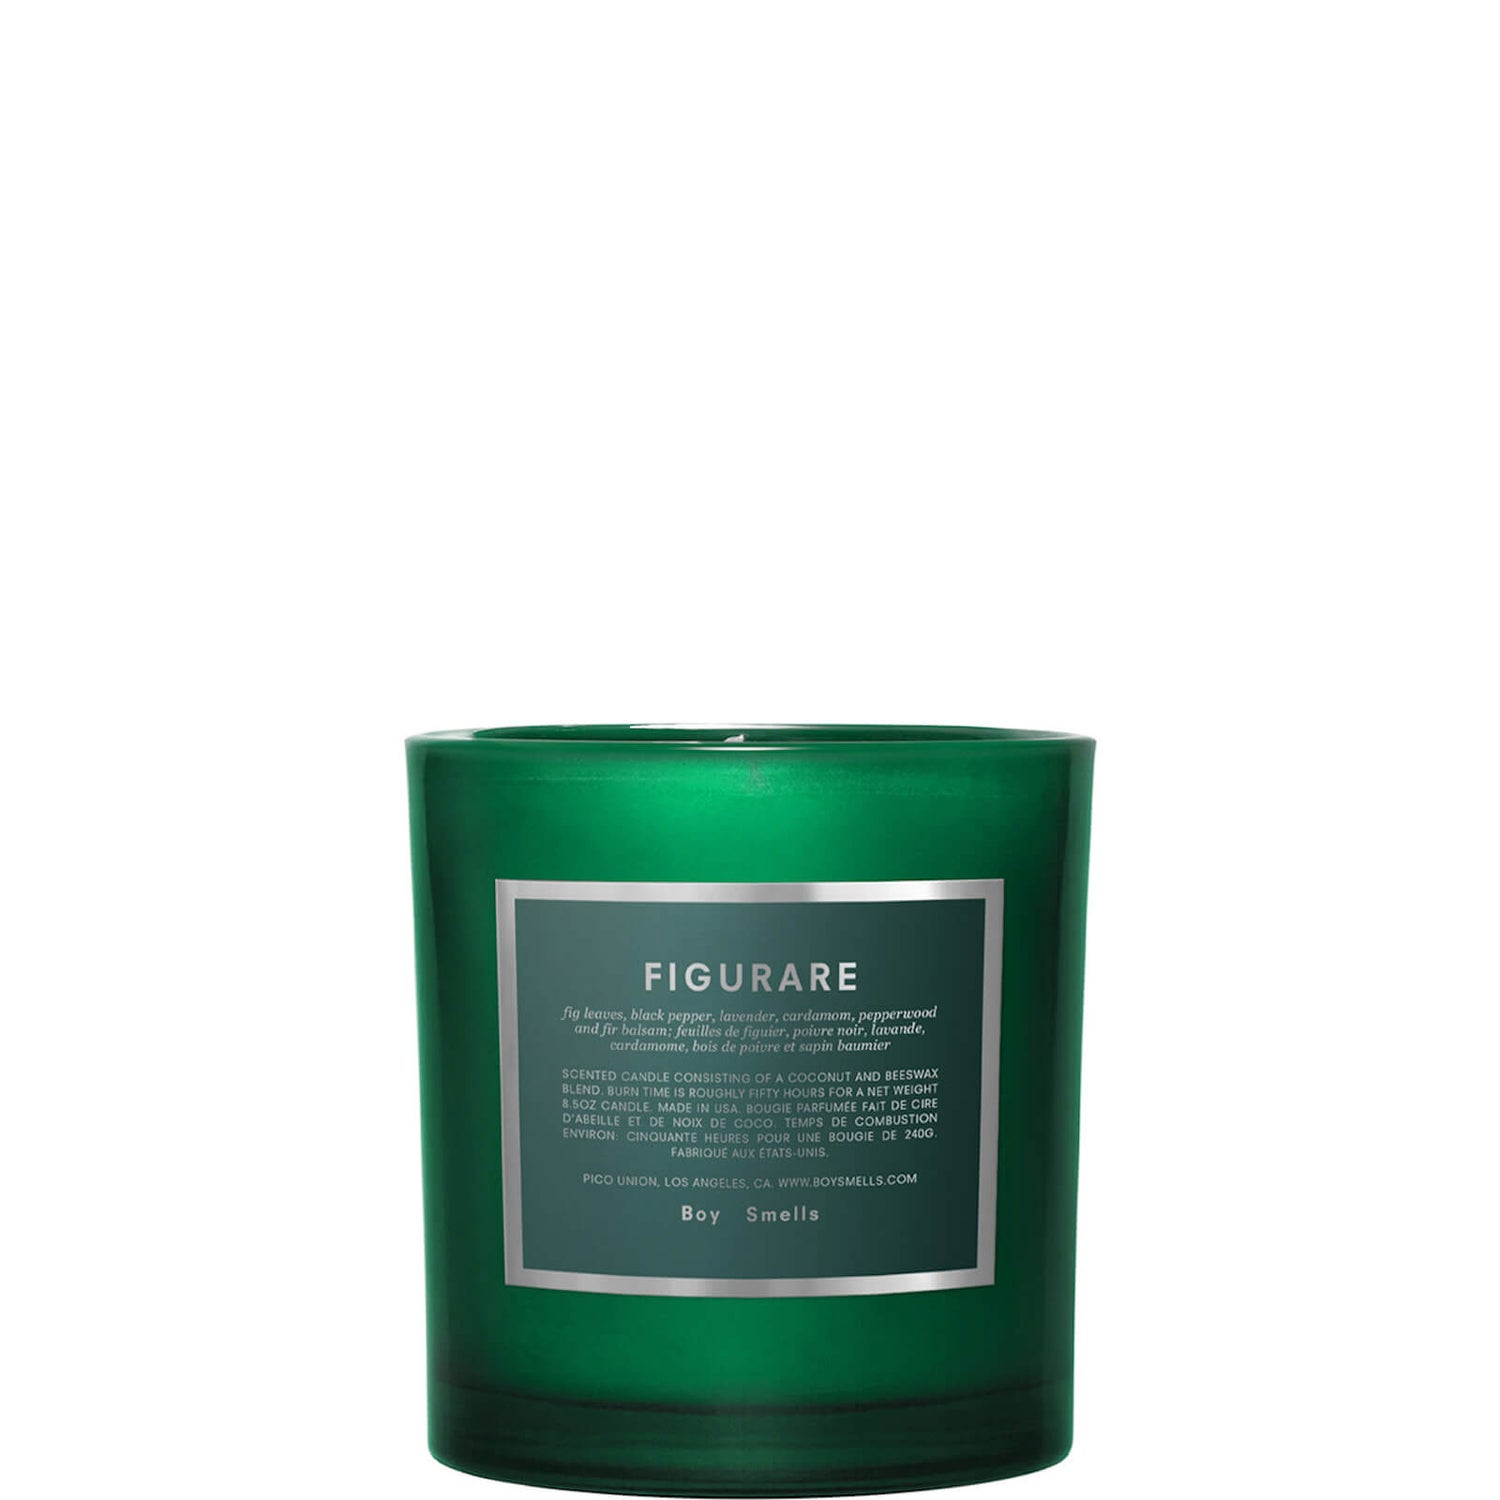 Boy Smells Figurare Candle (240g)